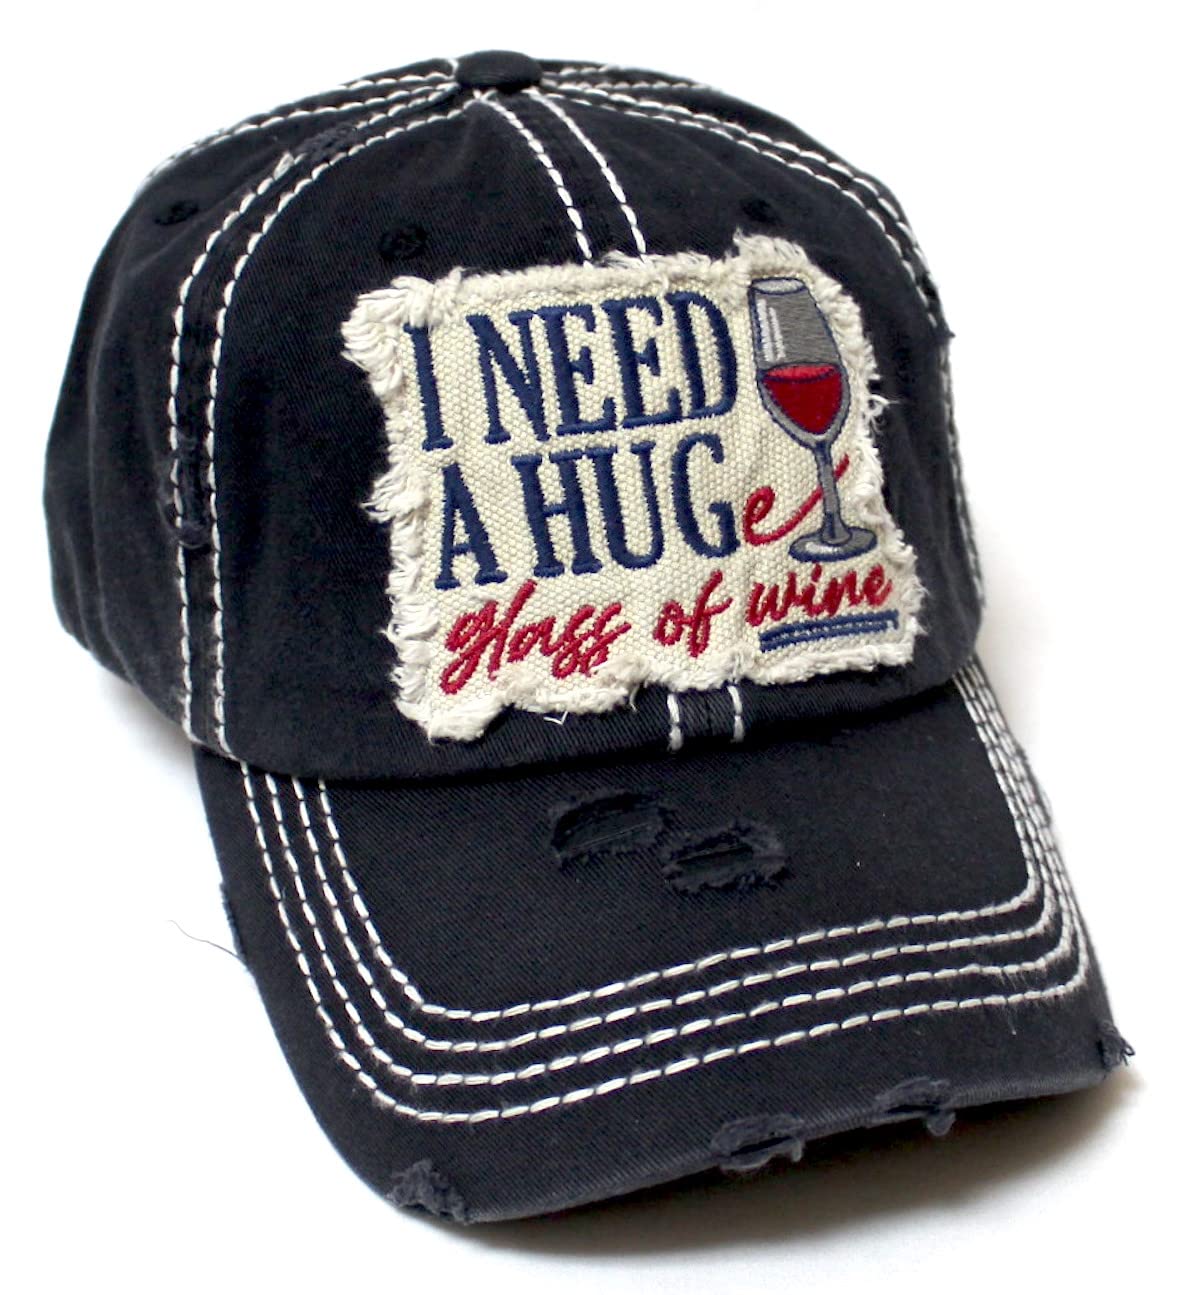 Women's Hat I Need a Hug, Huge Glass if Wine Patch Embroidery Distressed Vintage Cap, Black